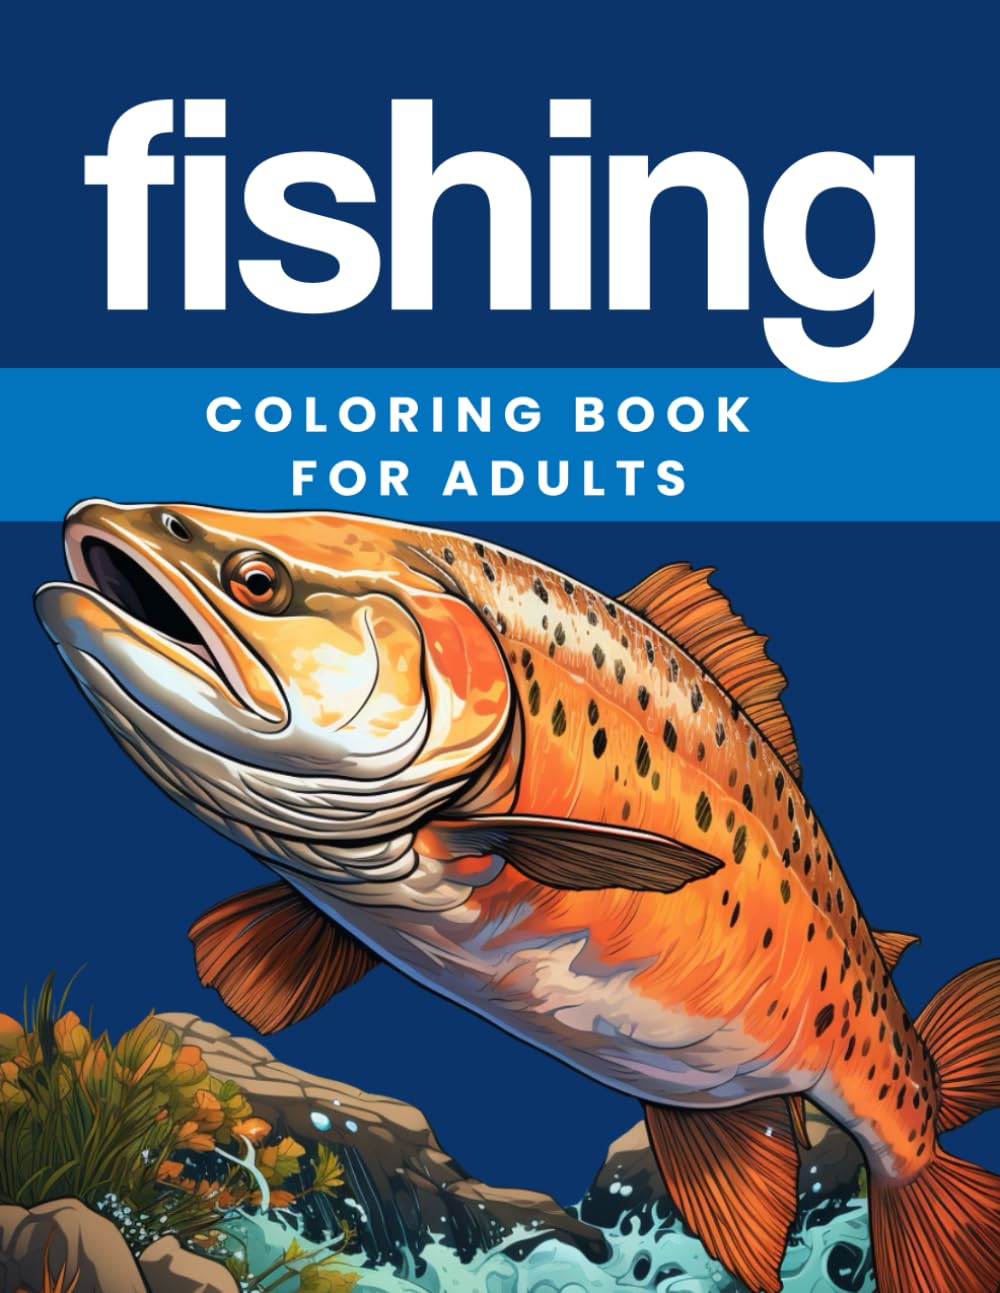 Fishing coloring book for adults.: Great book for men, boys and hunting lovers. Book include fly fishing, bass, pike, salmon and other fishes. For ... fishing scenes. Freshwater and ocean fish